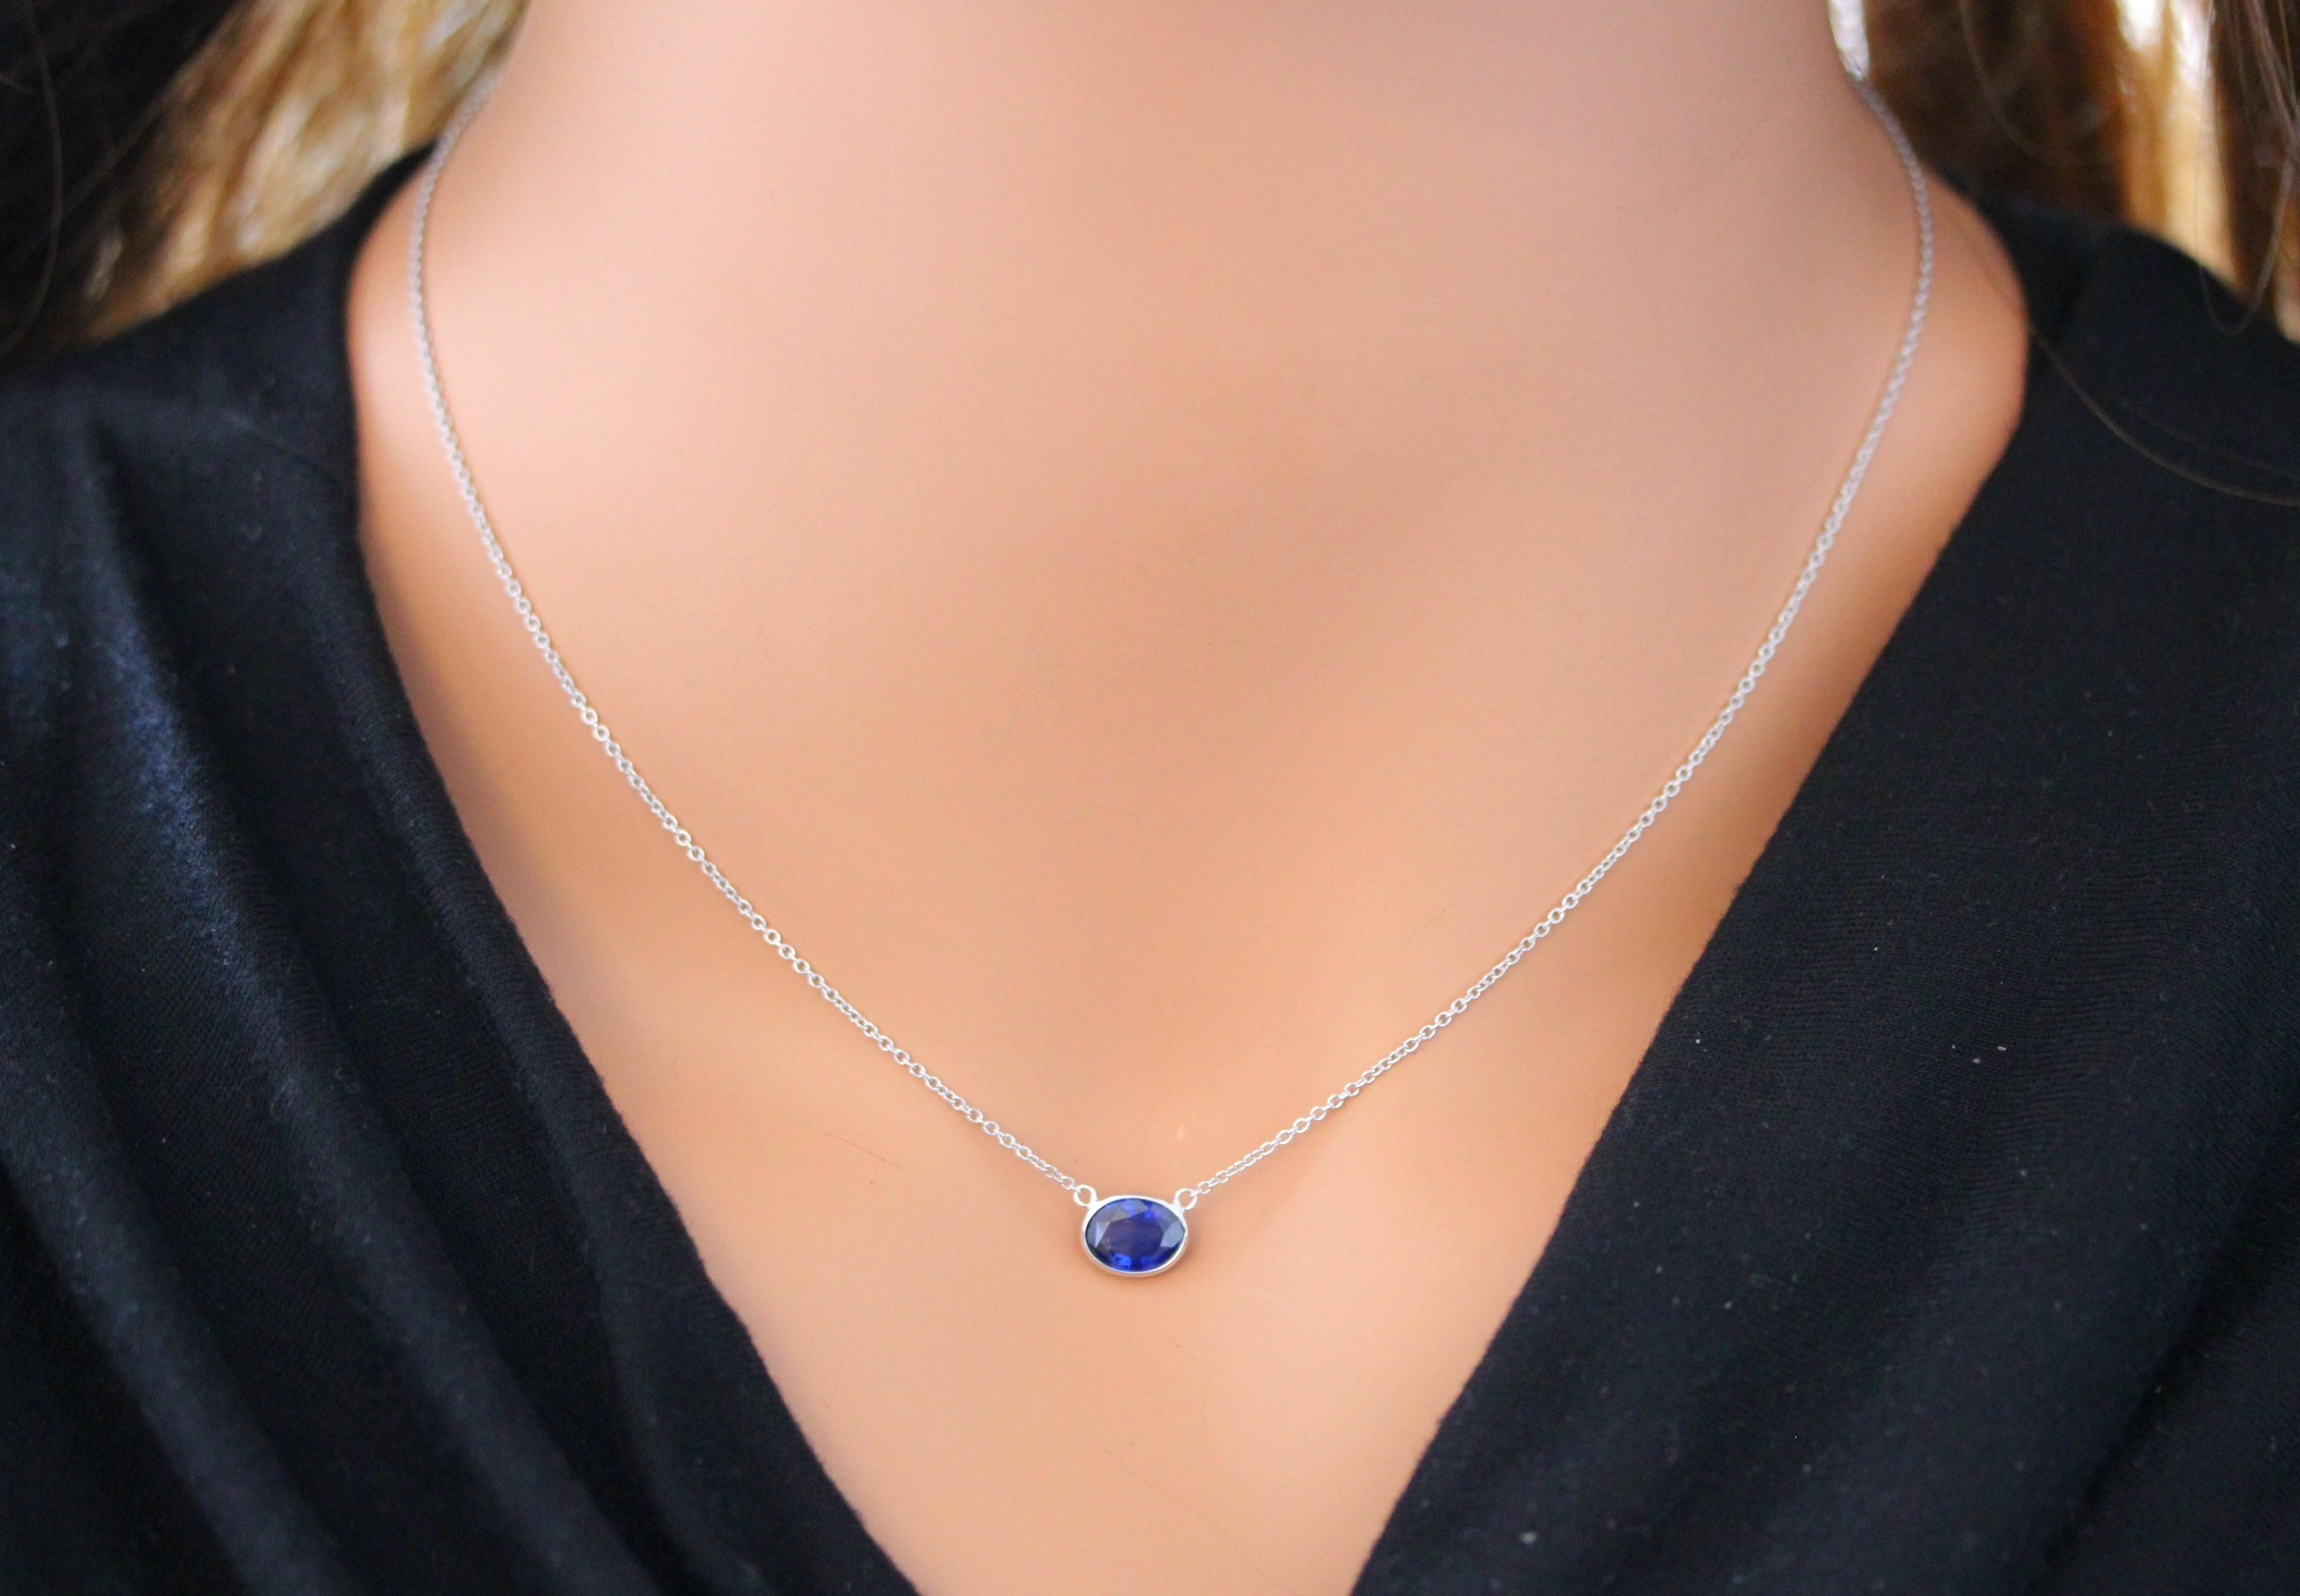 Contemporary 1.83 Carat Oval Sapphire Blue Fashion Necklaces In 14k White Gold For Sale